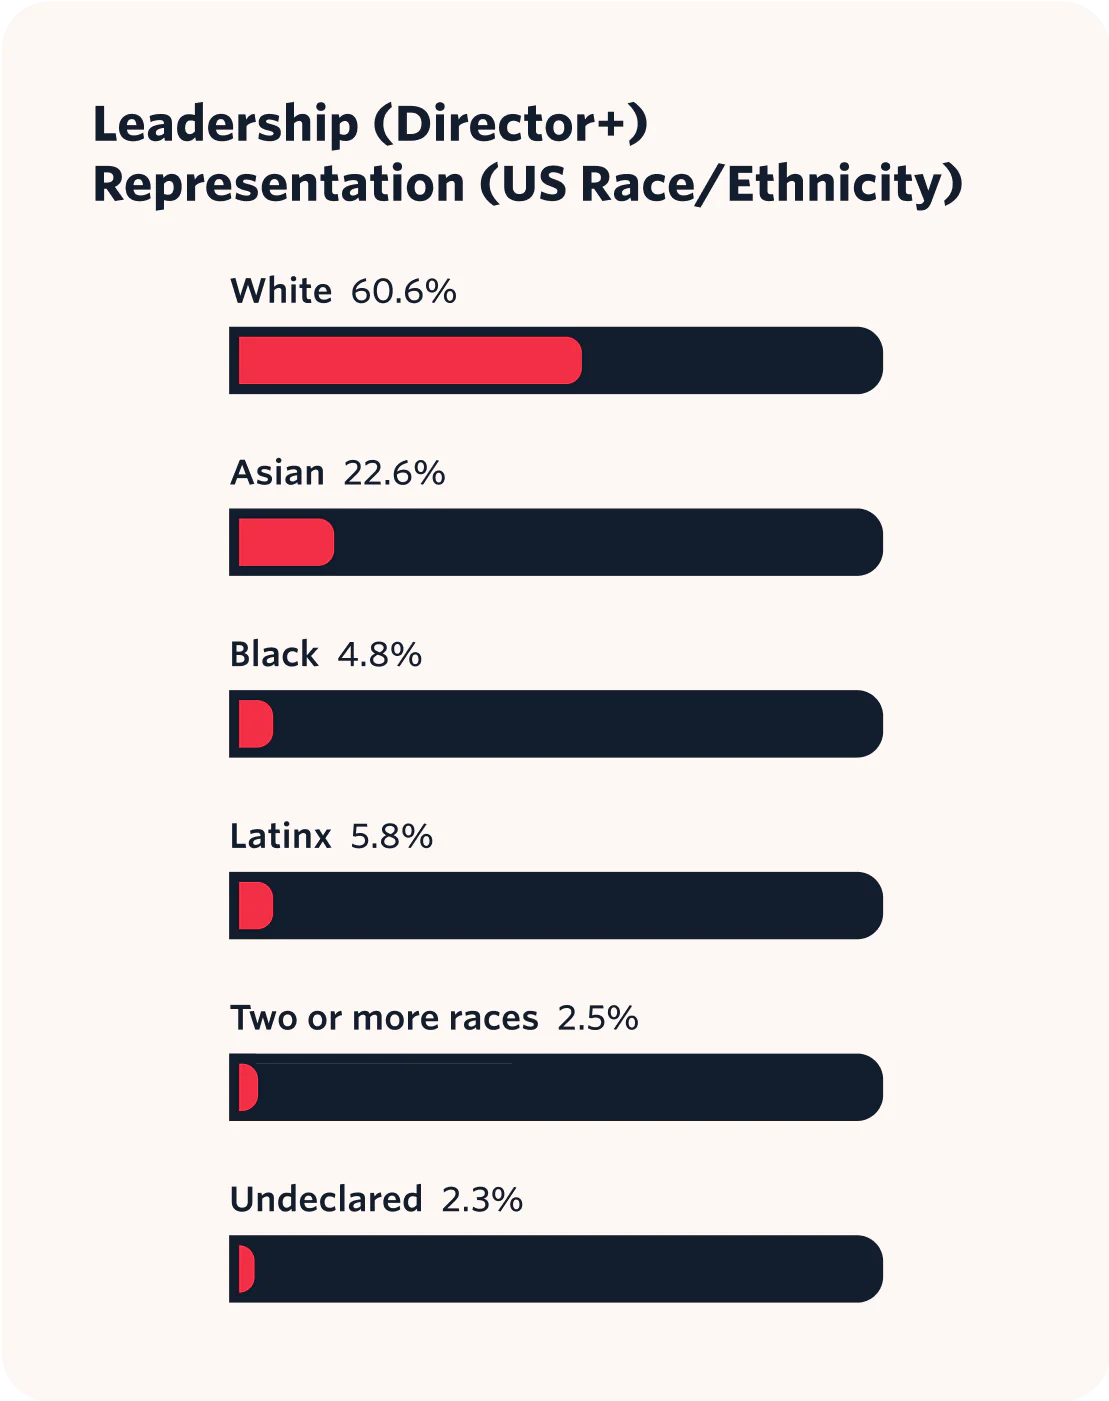 Leadership (Director+) Representation (US Race/ Ethnicity) data represented in a bar chart.